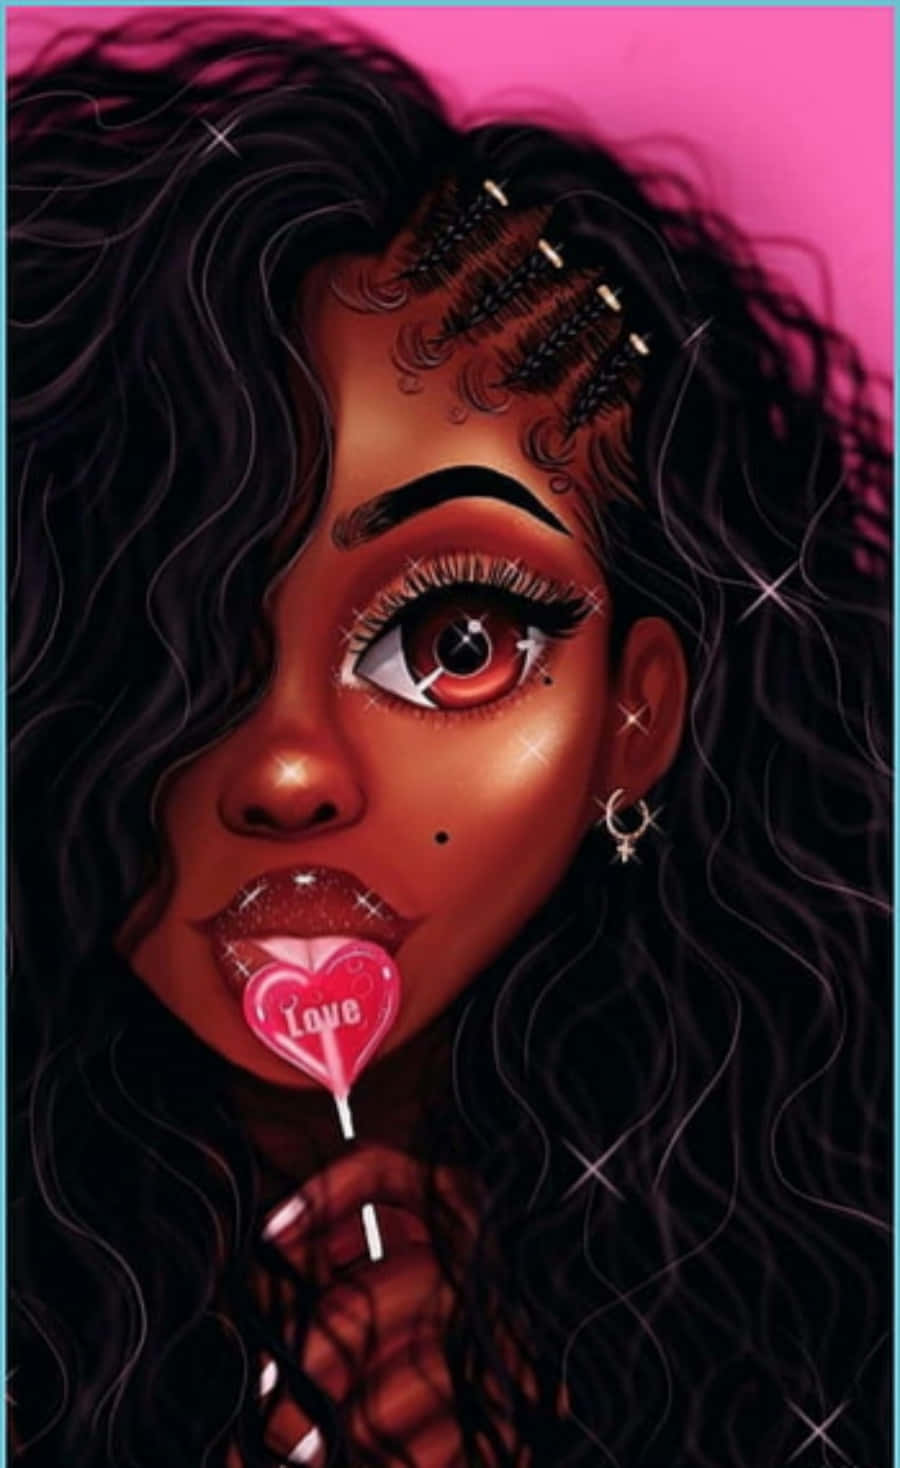 A Black Girl With Long Hair And A Lollipop